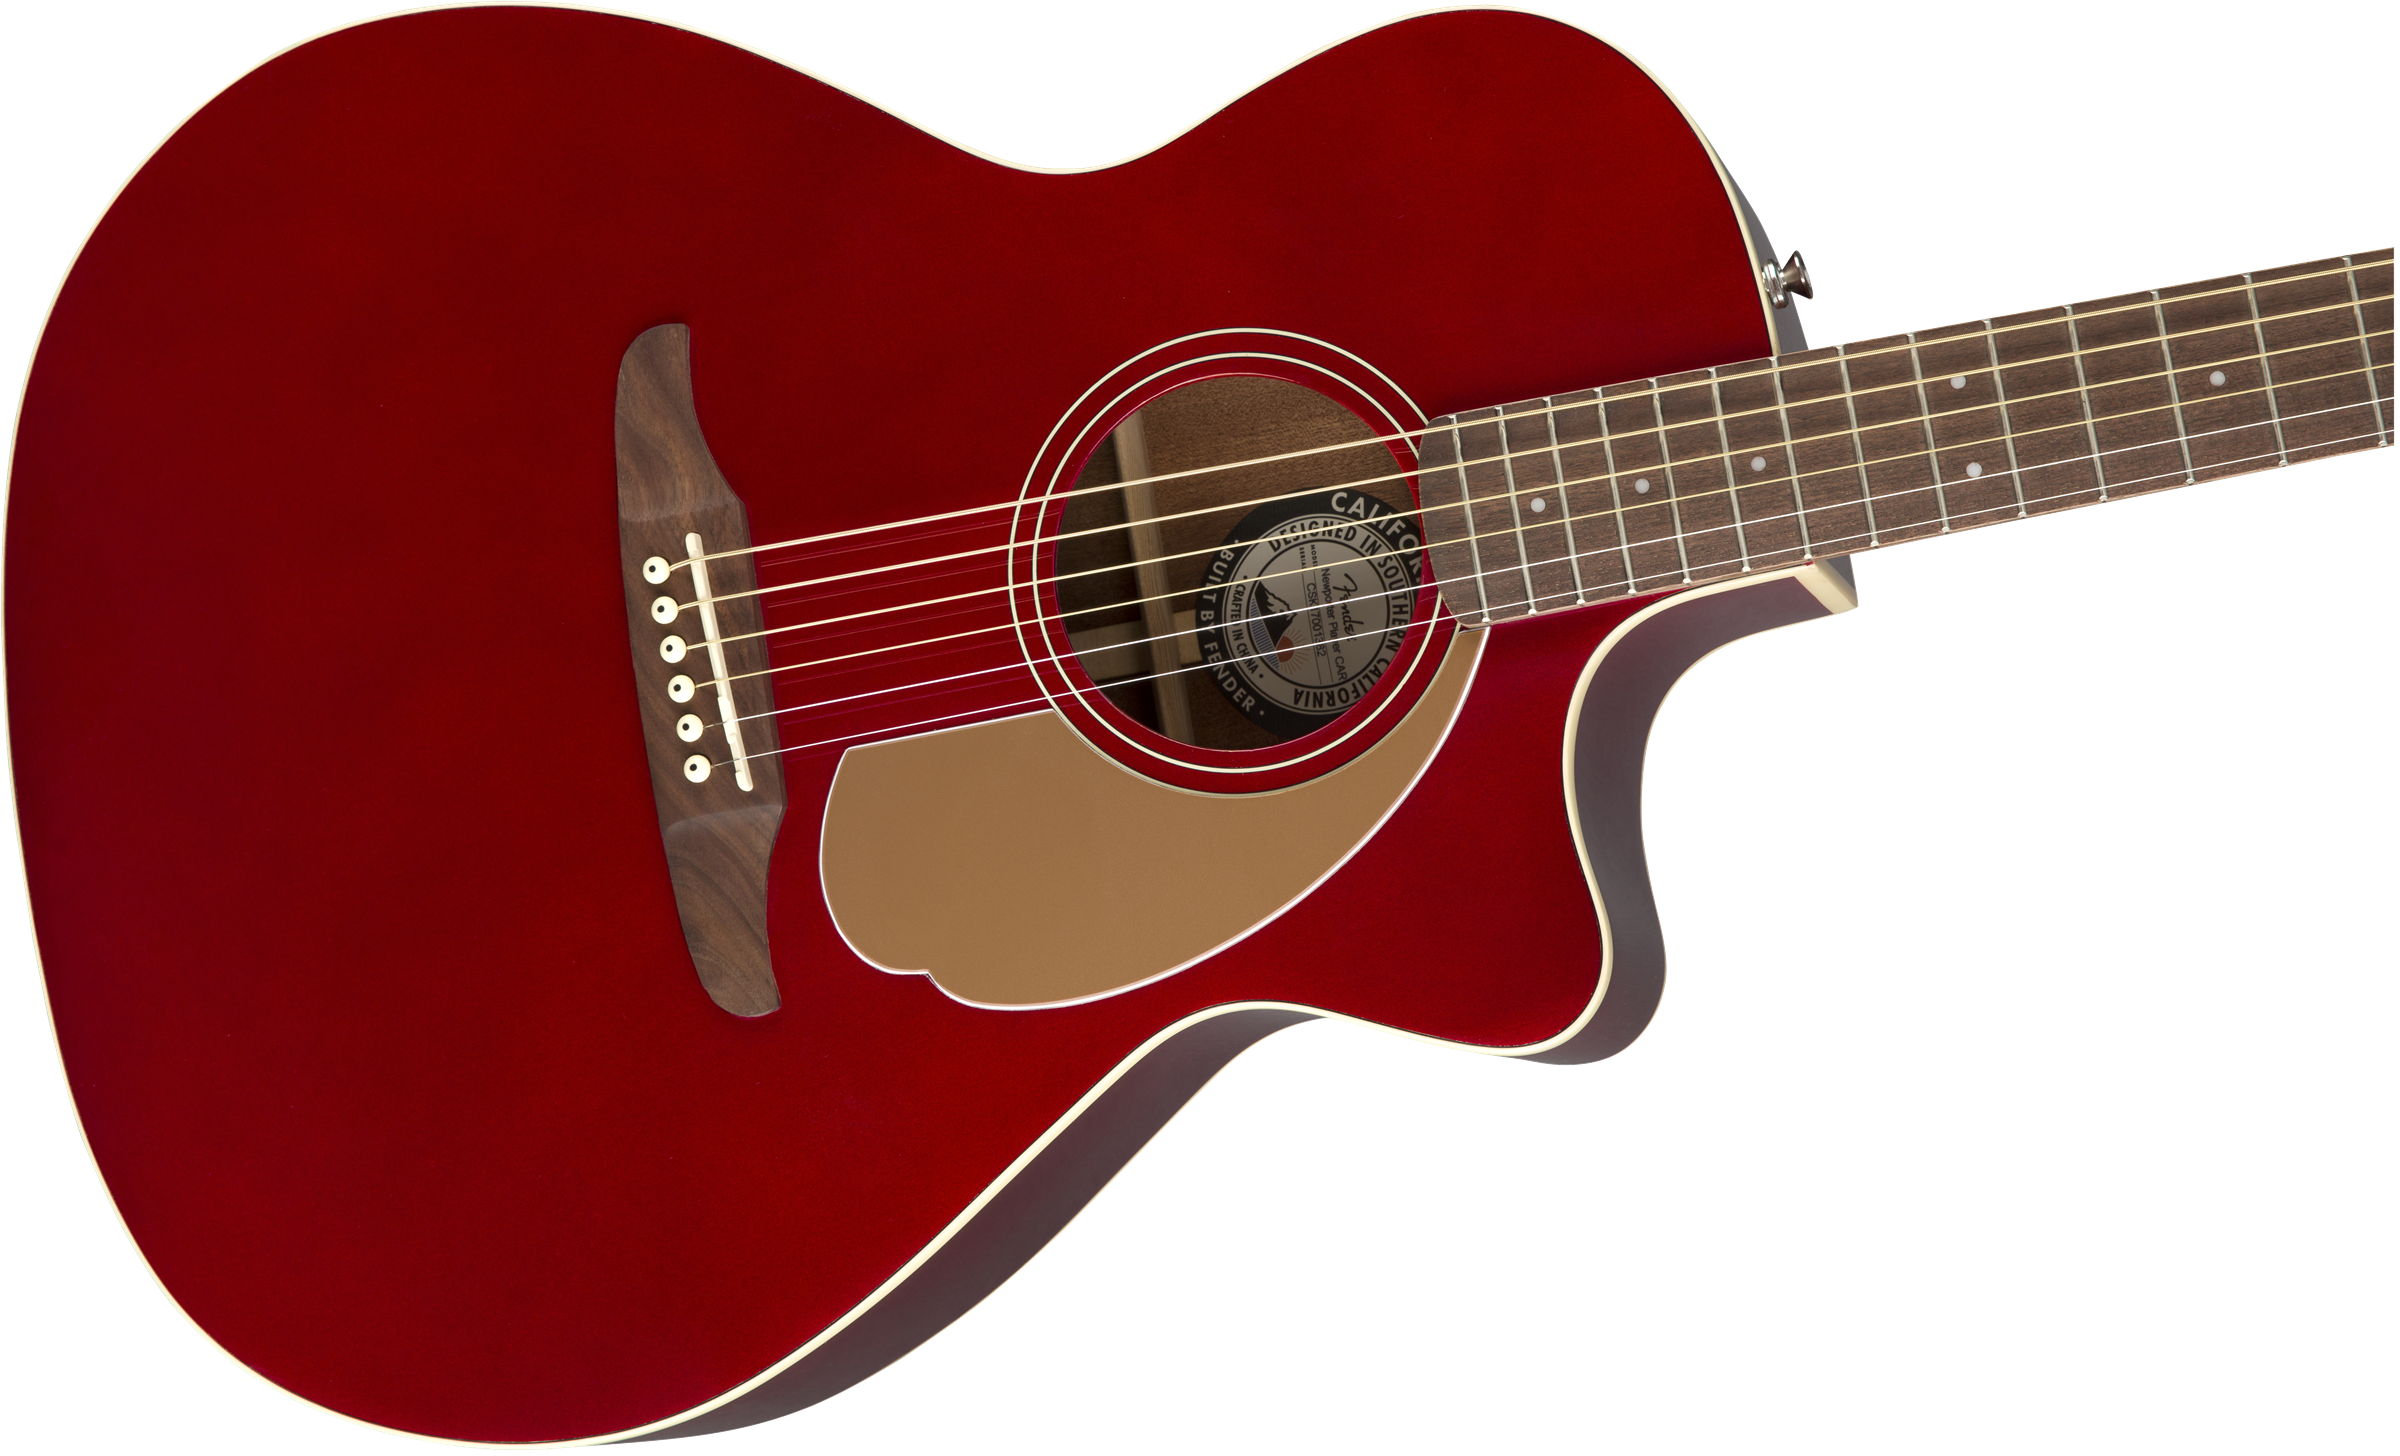 Fender Newporter Player Auditorium Cw Epicea Acajou Wal - Candy Apple Red - Electro acoustic guitar - Variation 4